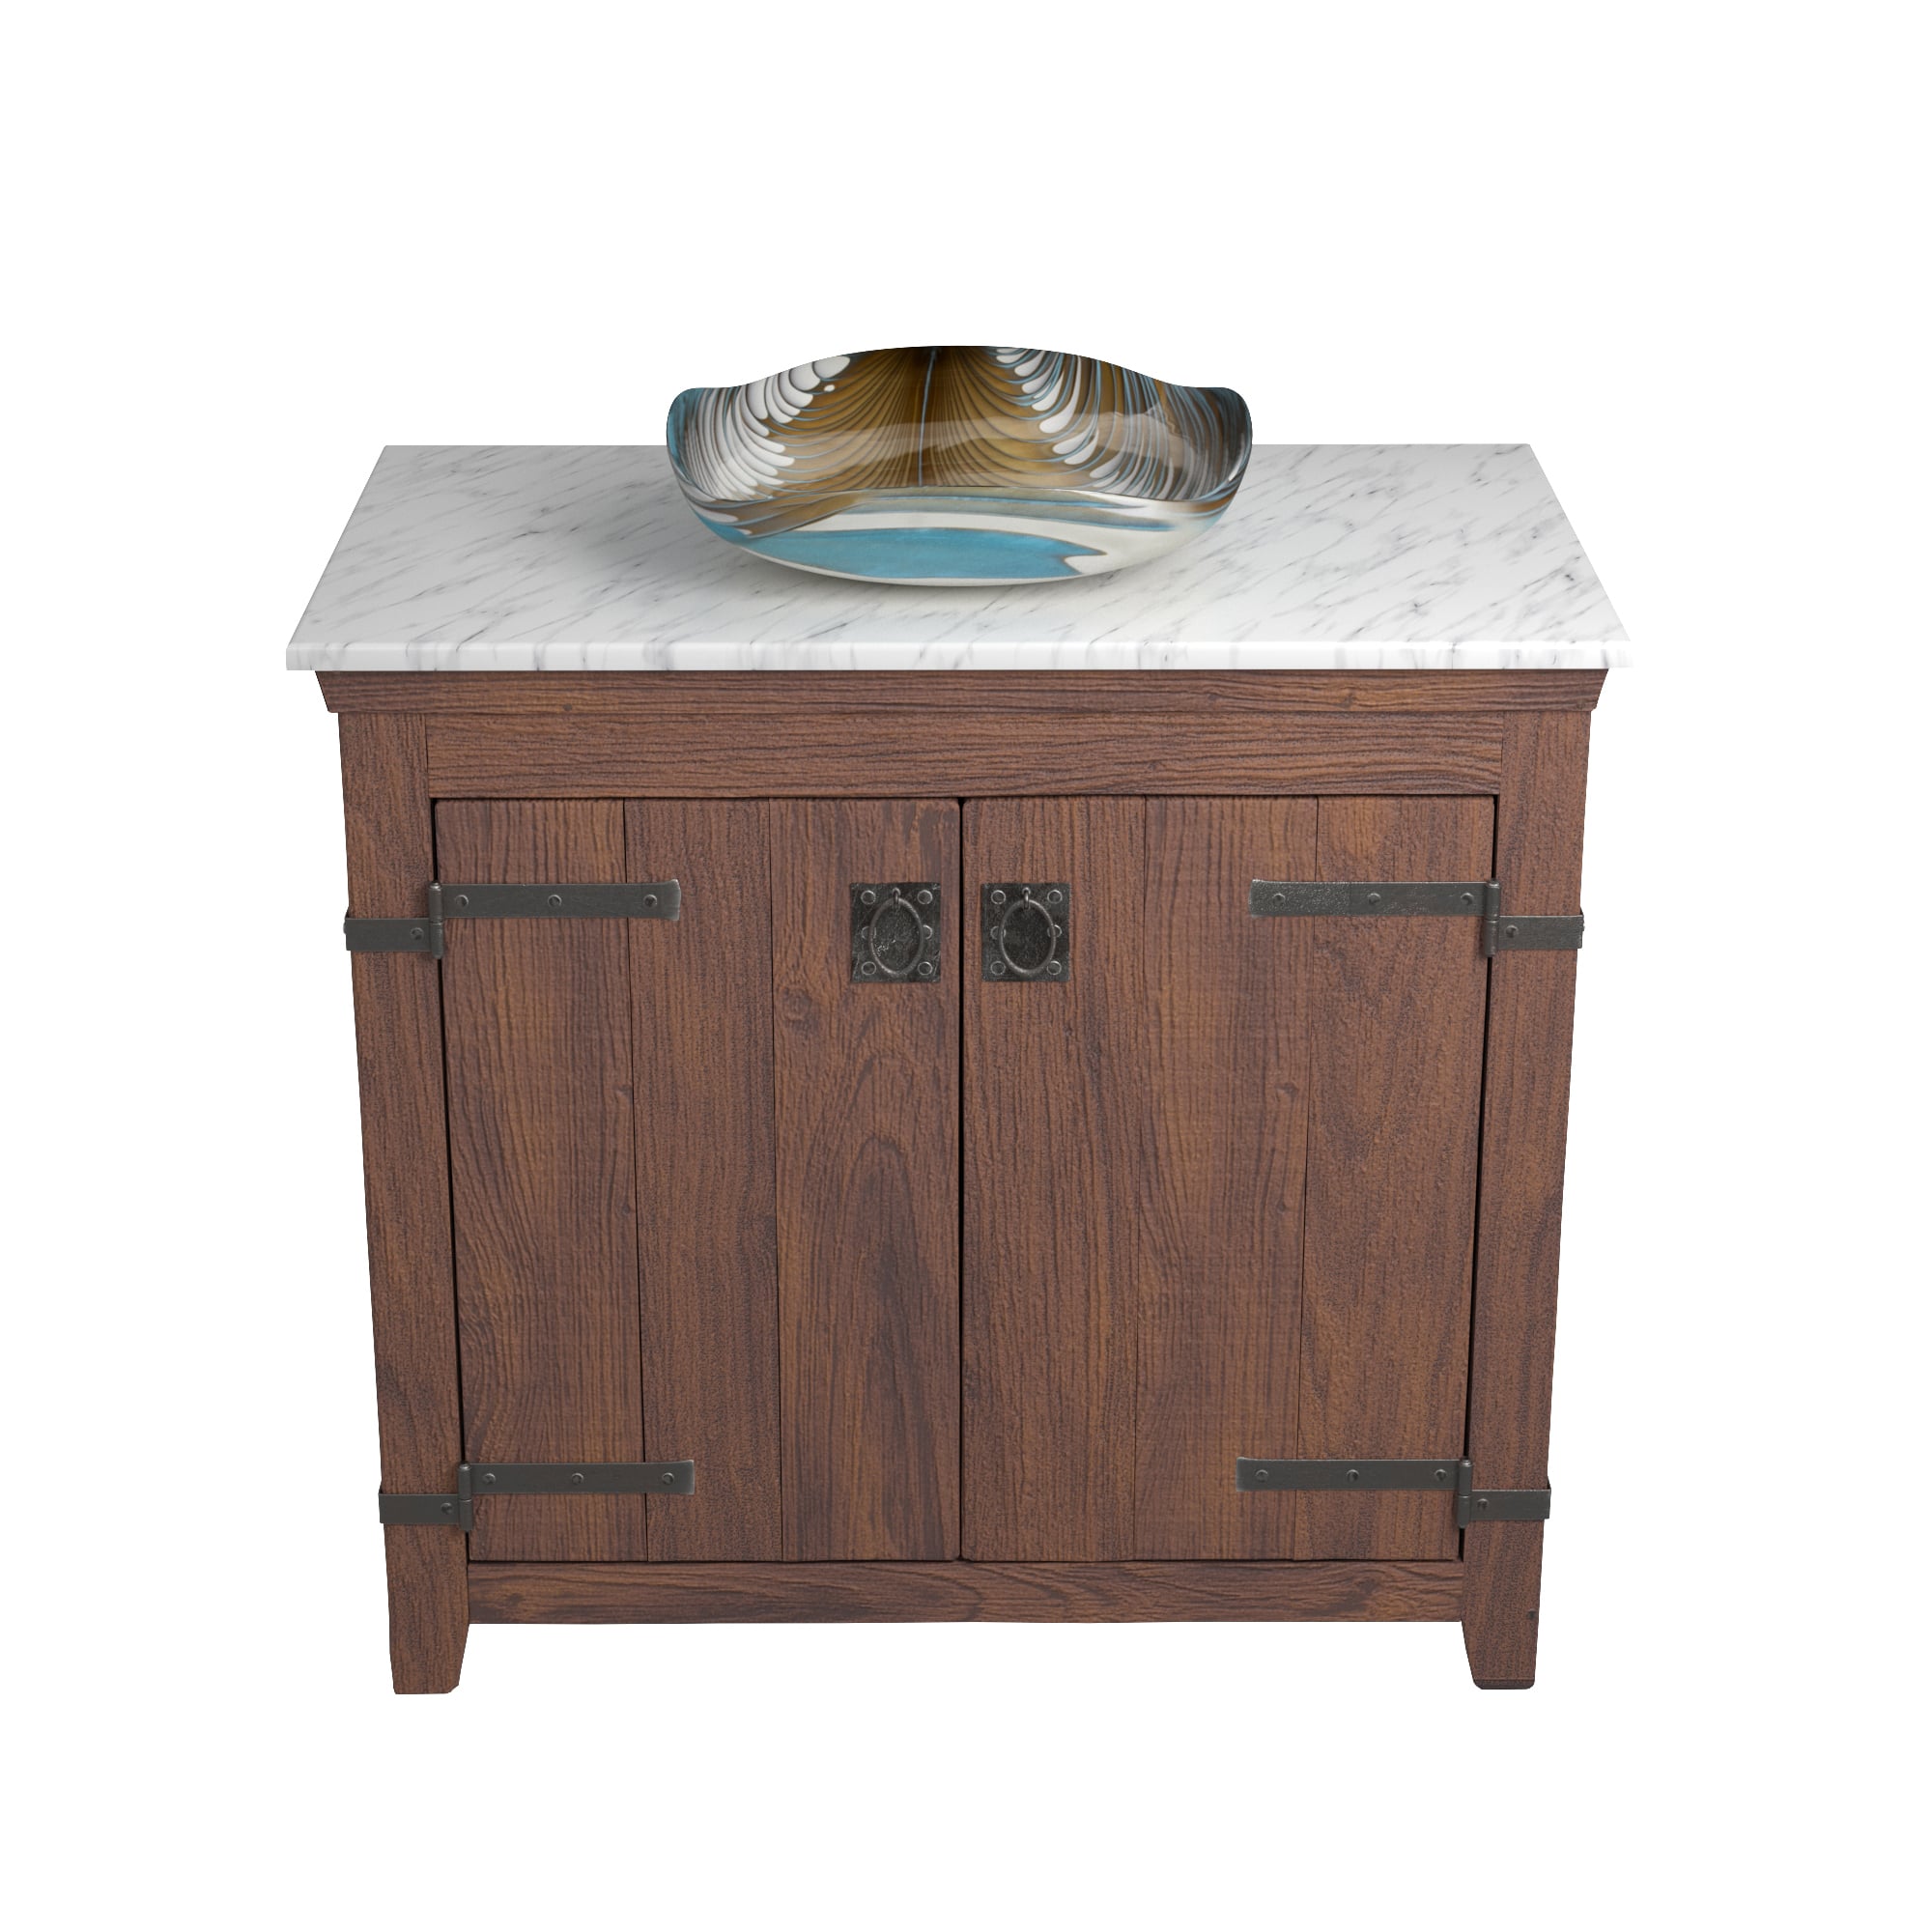 Native Trails 36" Americana Vanity in Chestnut with Carrara Marble Top and Lido in Shoreline, Single Faucet Hole, BND36-VB-CT-MG-027